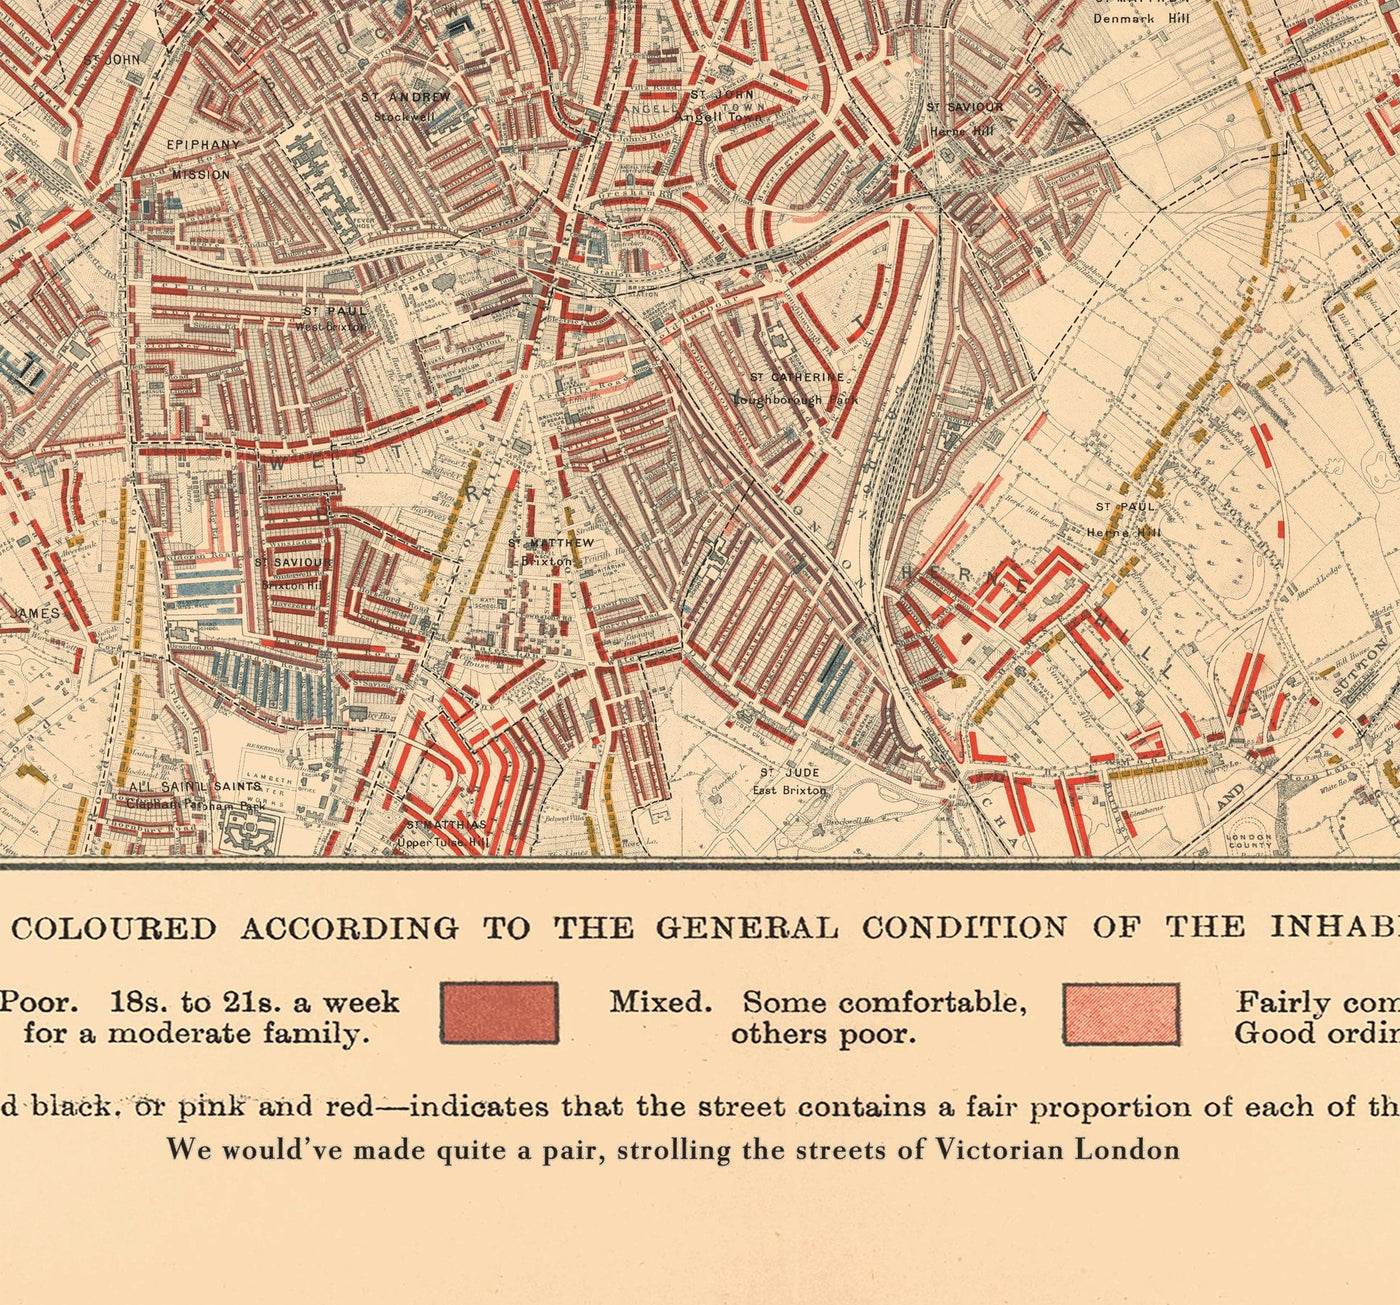 Map of London Poverty 1898-9, South Western District, by Charles Booth - Battersea, Clapham, Putney, Wandsworth - SW6, SW15, SW18, SW10, SW11, SW8, SW4